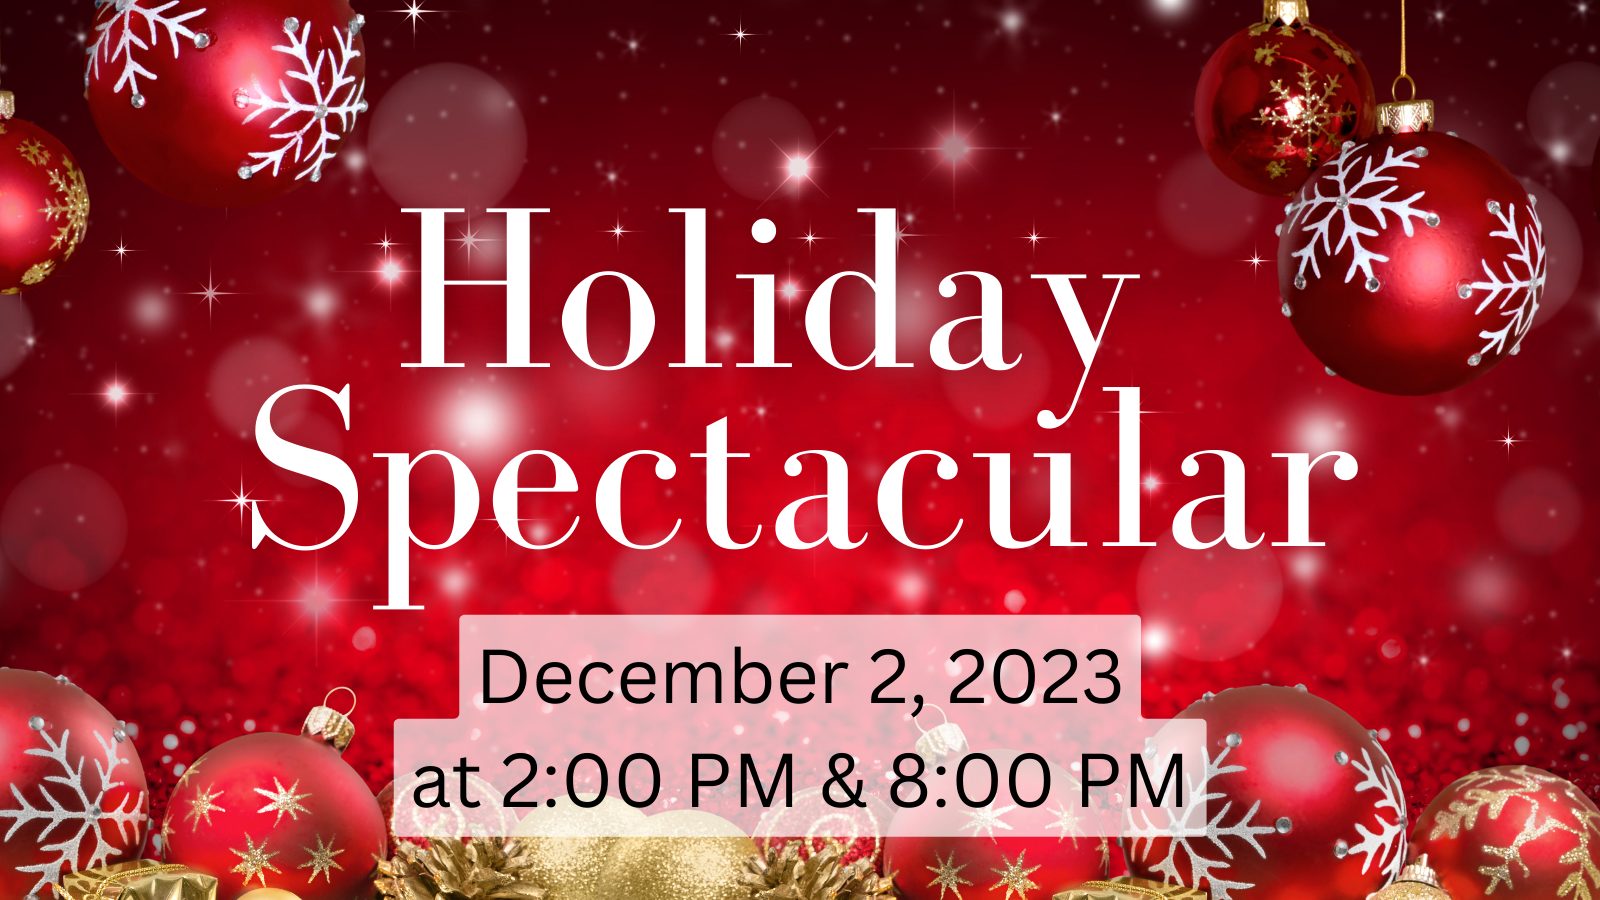 Holiday Spectacular December 2, 2023 at 2 pm and 8 pm